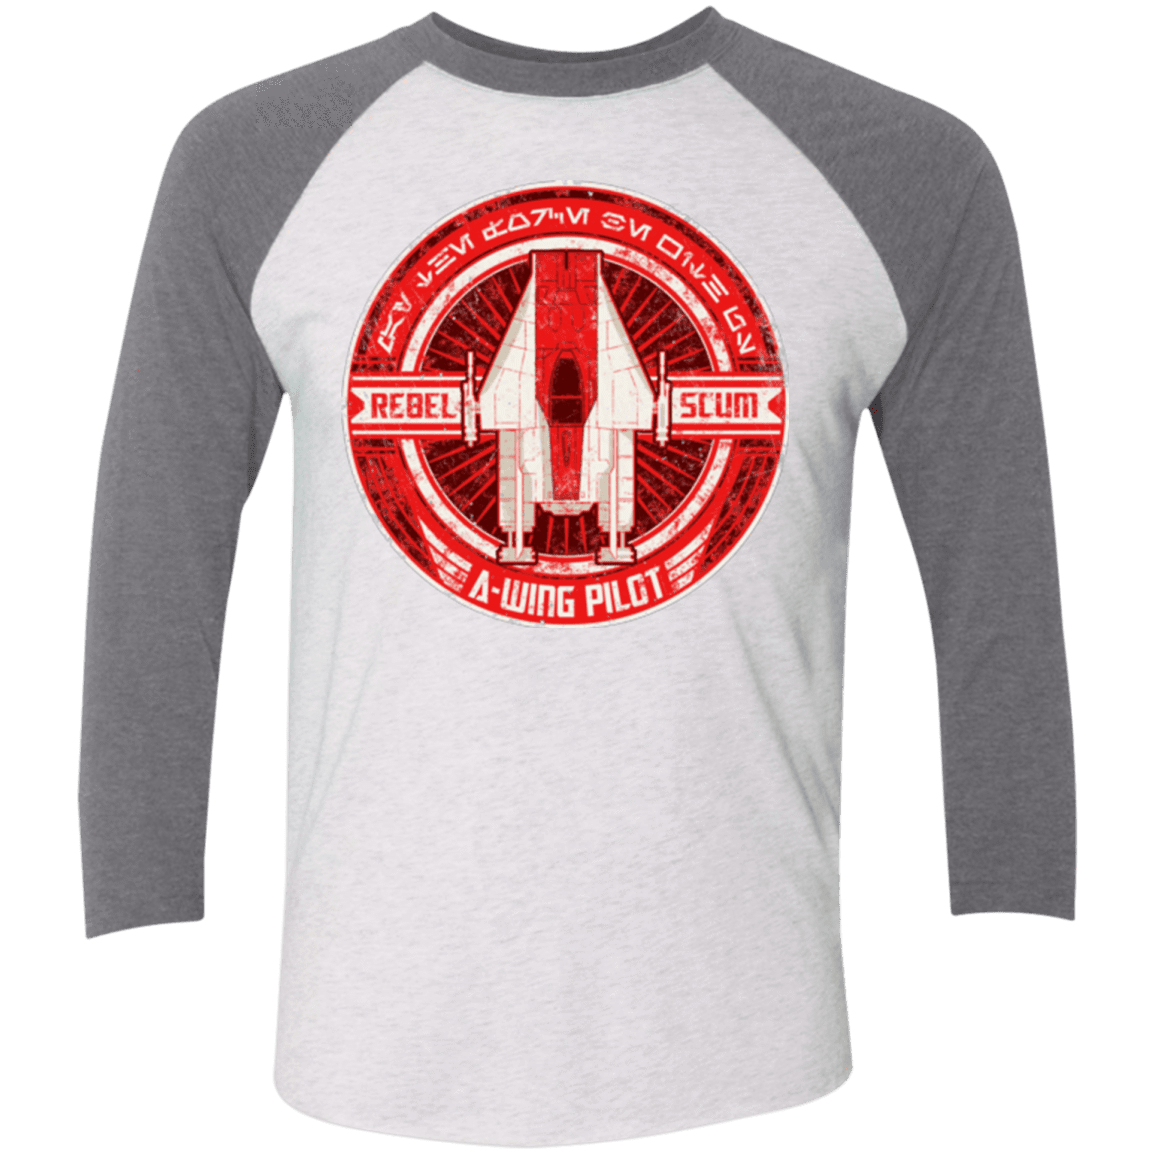 T-Shirts Heather White/Premium Heather / X-Small A-Wing Men's Triblend 3/4 Sleeve